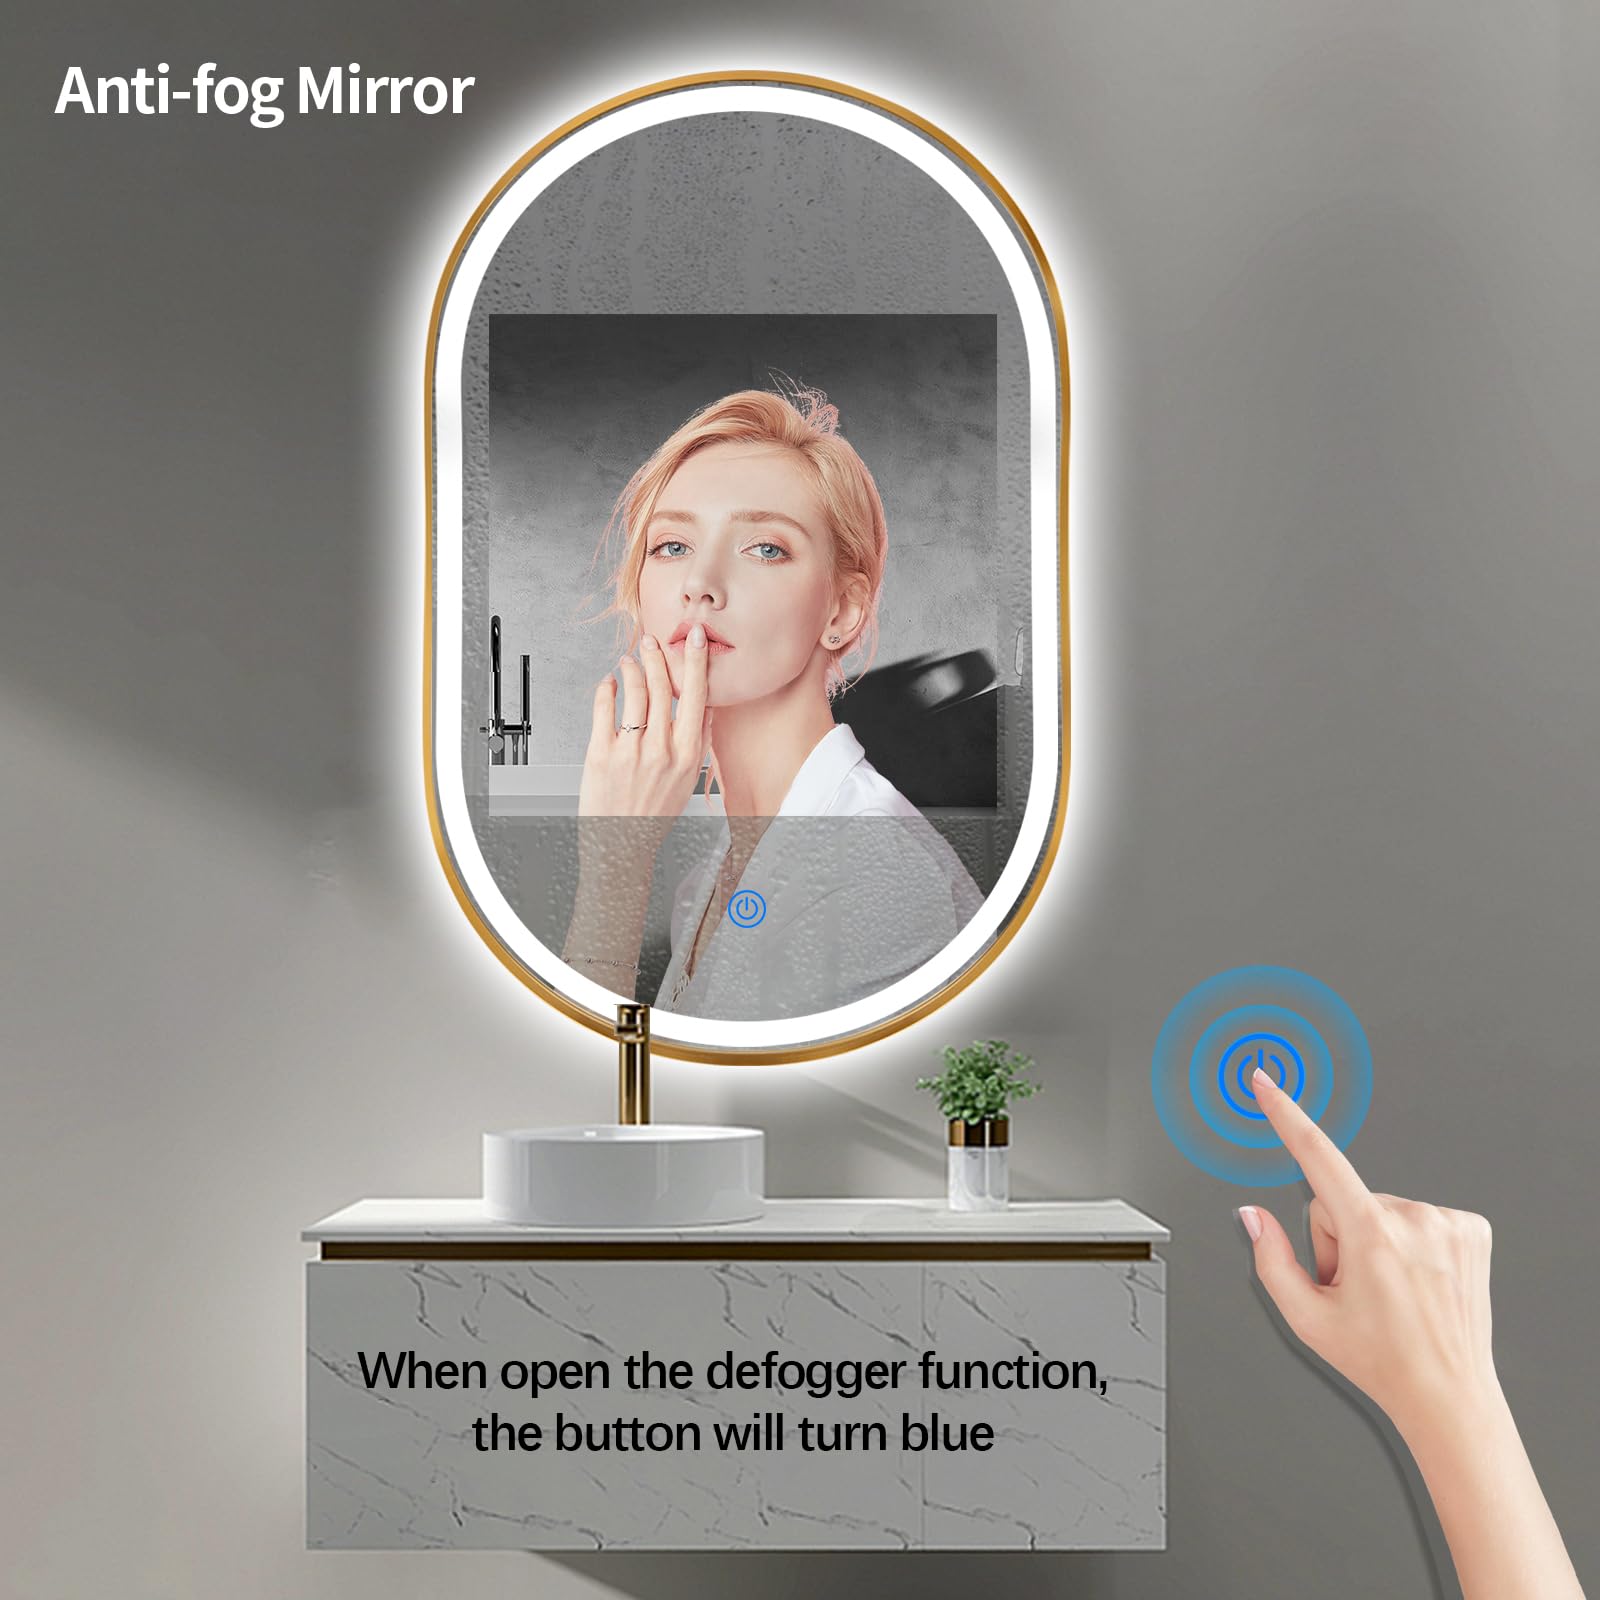 TheiaMo Oval LED Bathroom Mirror, 36"x24" Lighted Wall Mounted Vanity Mirror with Metal Frame, Anti-Fog IP66 Waterproof Smart Mirror, Memory Function,3000-6000K(Horizontal or Vertical), Gold